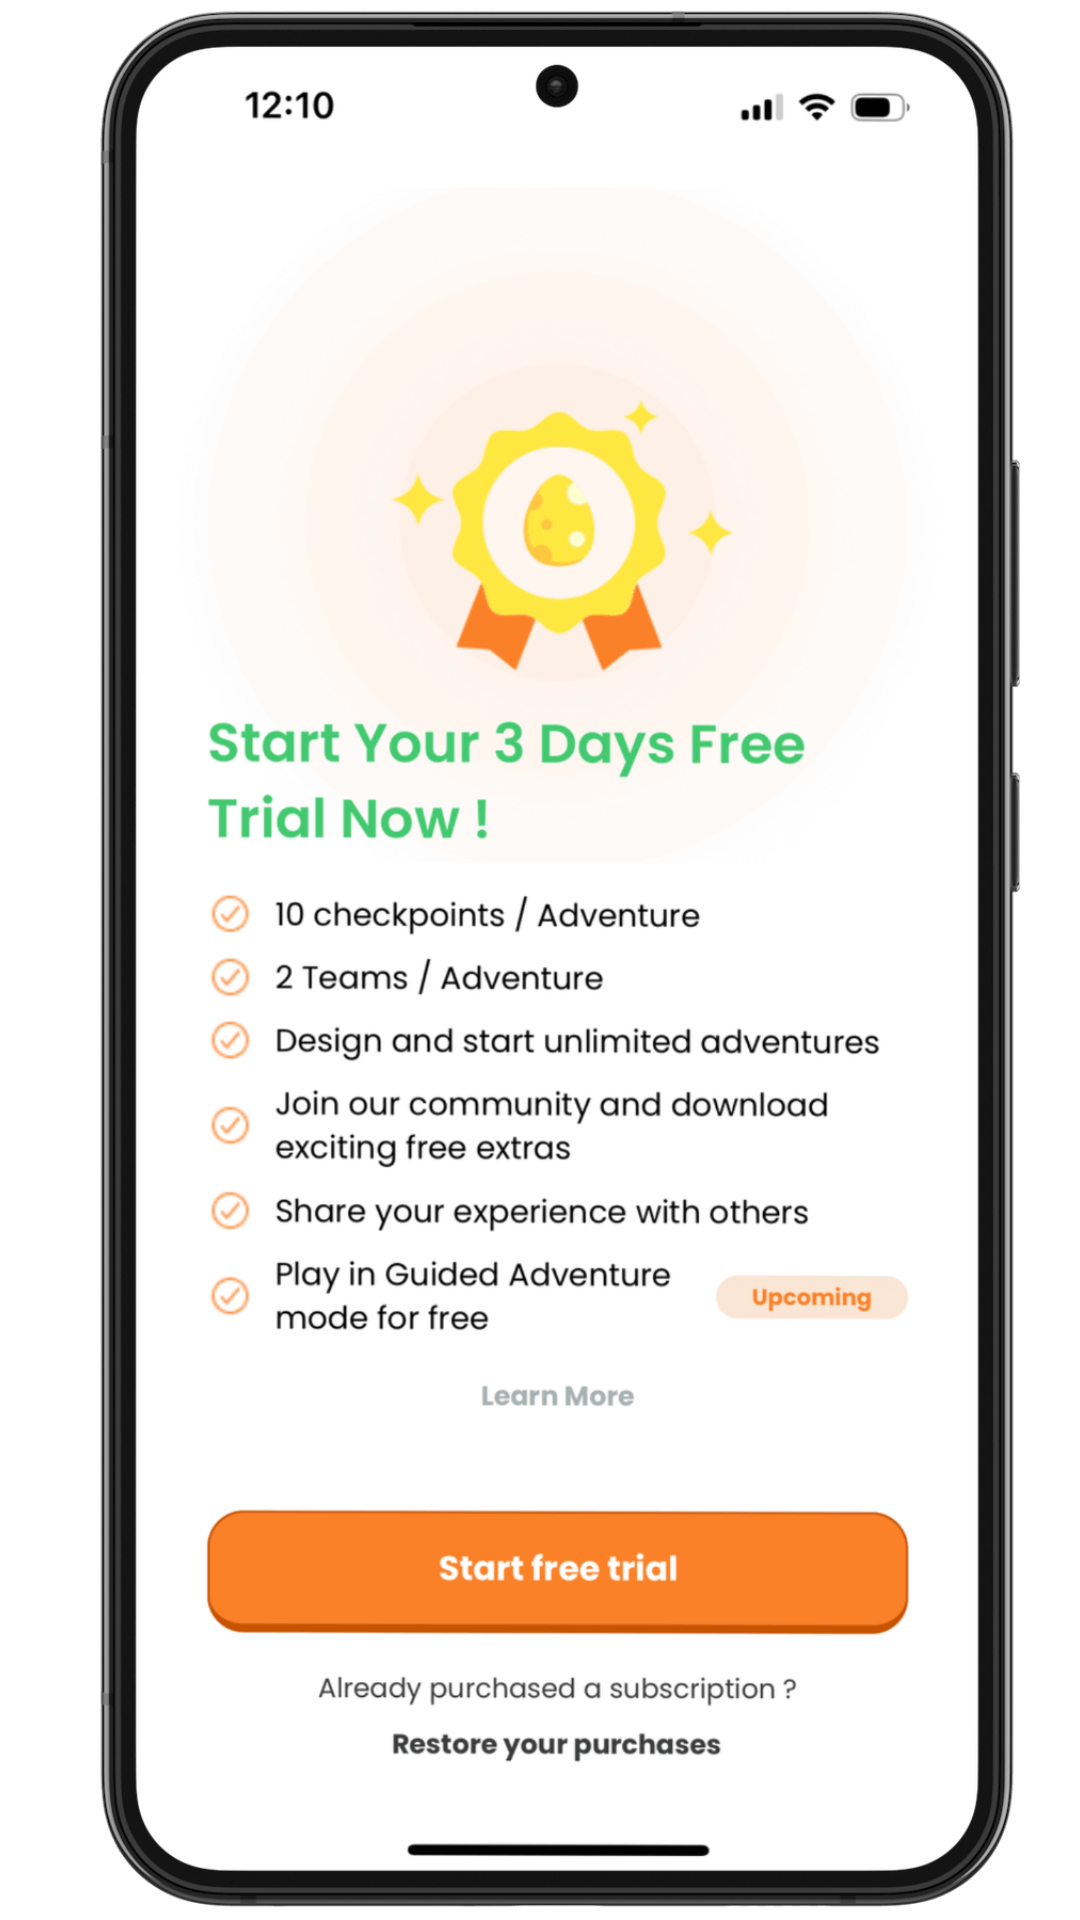 Globe Chaser Scavenger Hunt App - Free Premium Trial available